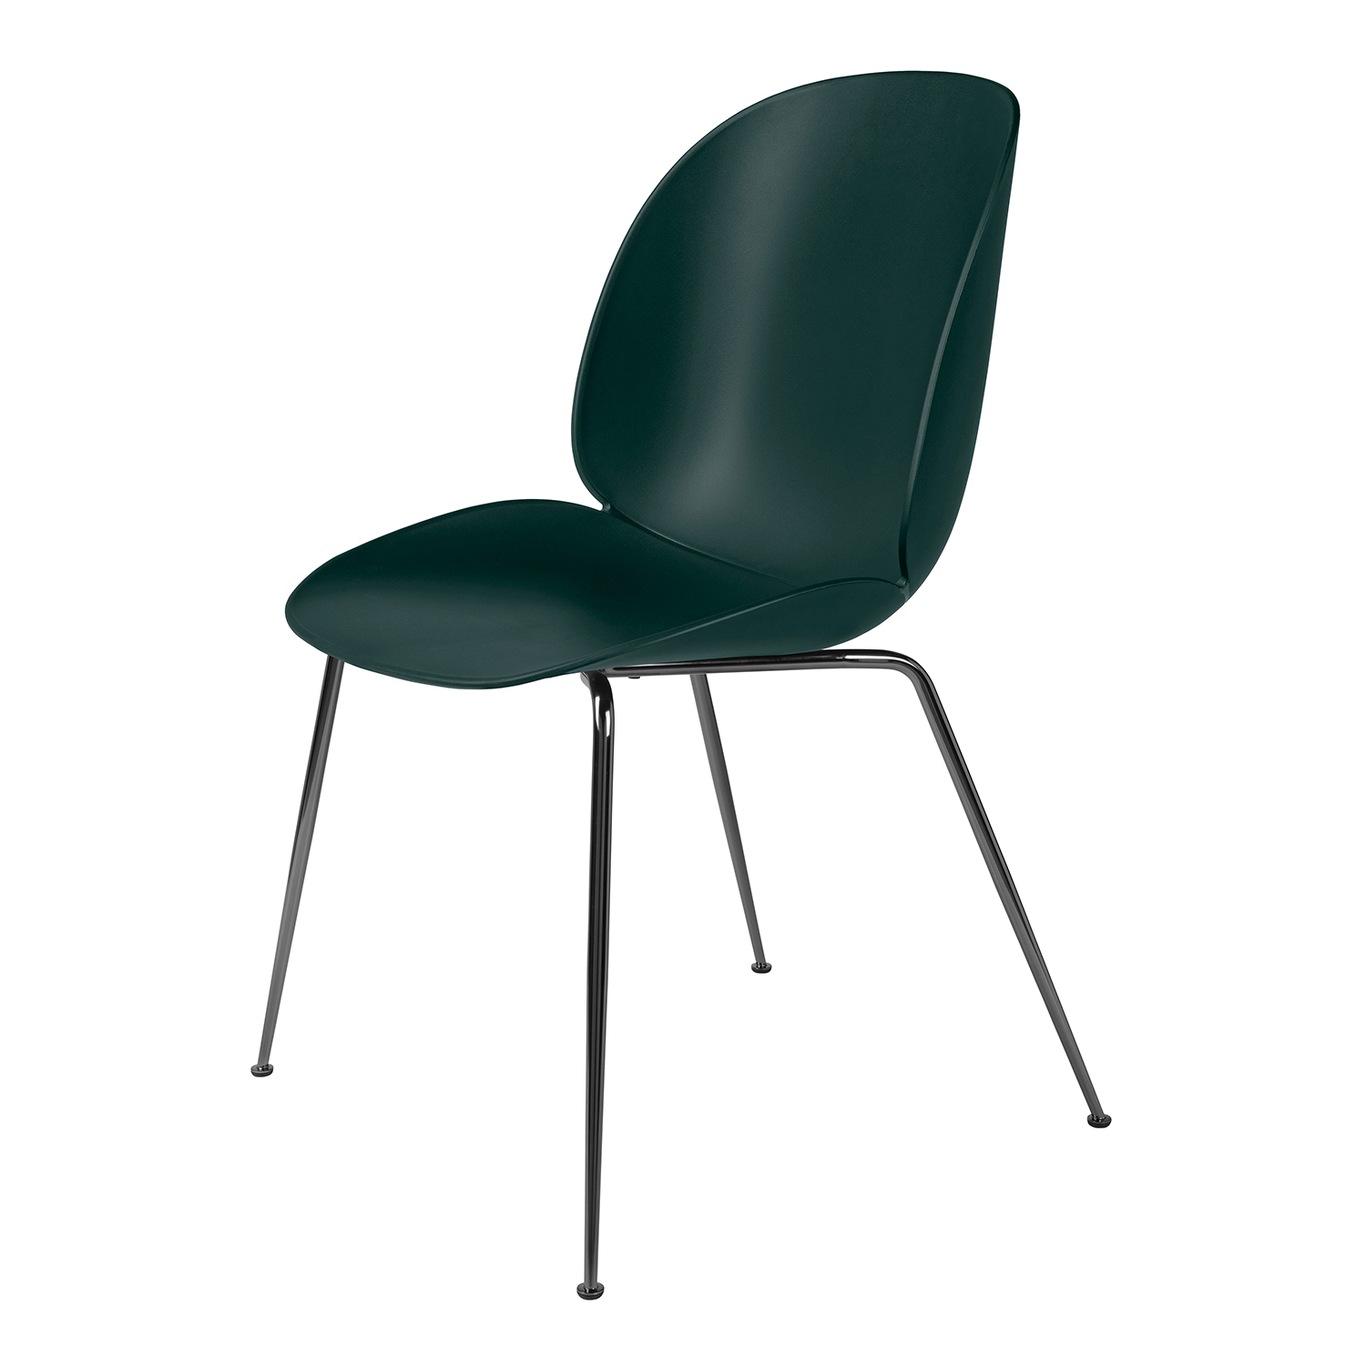 Beetle Dining Chair Unupholstered, Conic Base Black Chromed, Green